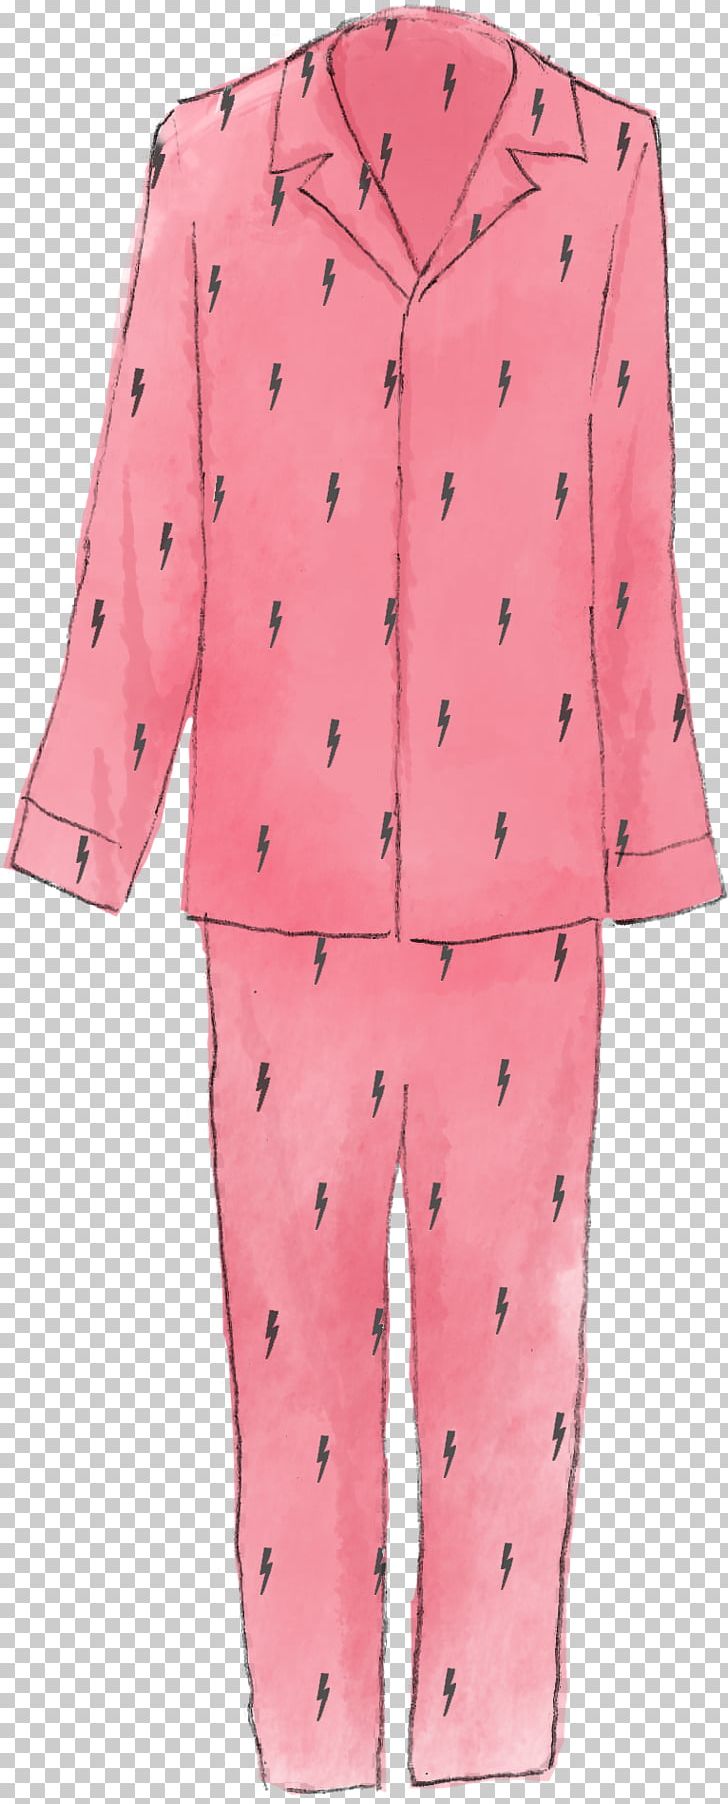 Pajamas Button Outerwear Pink M Sleeve PNG, Clipart, Barnes Noble, Button, Clothing, Nightwear, Outerwear Free PNG Download